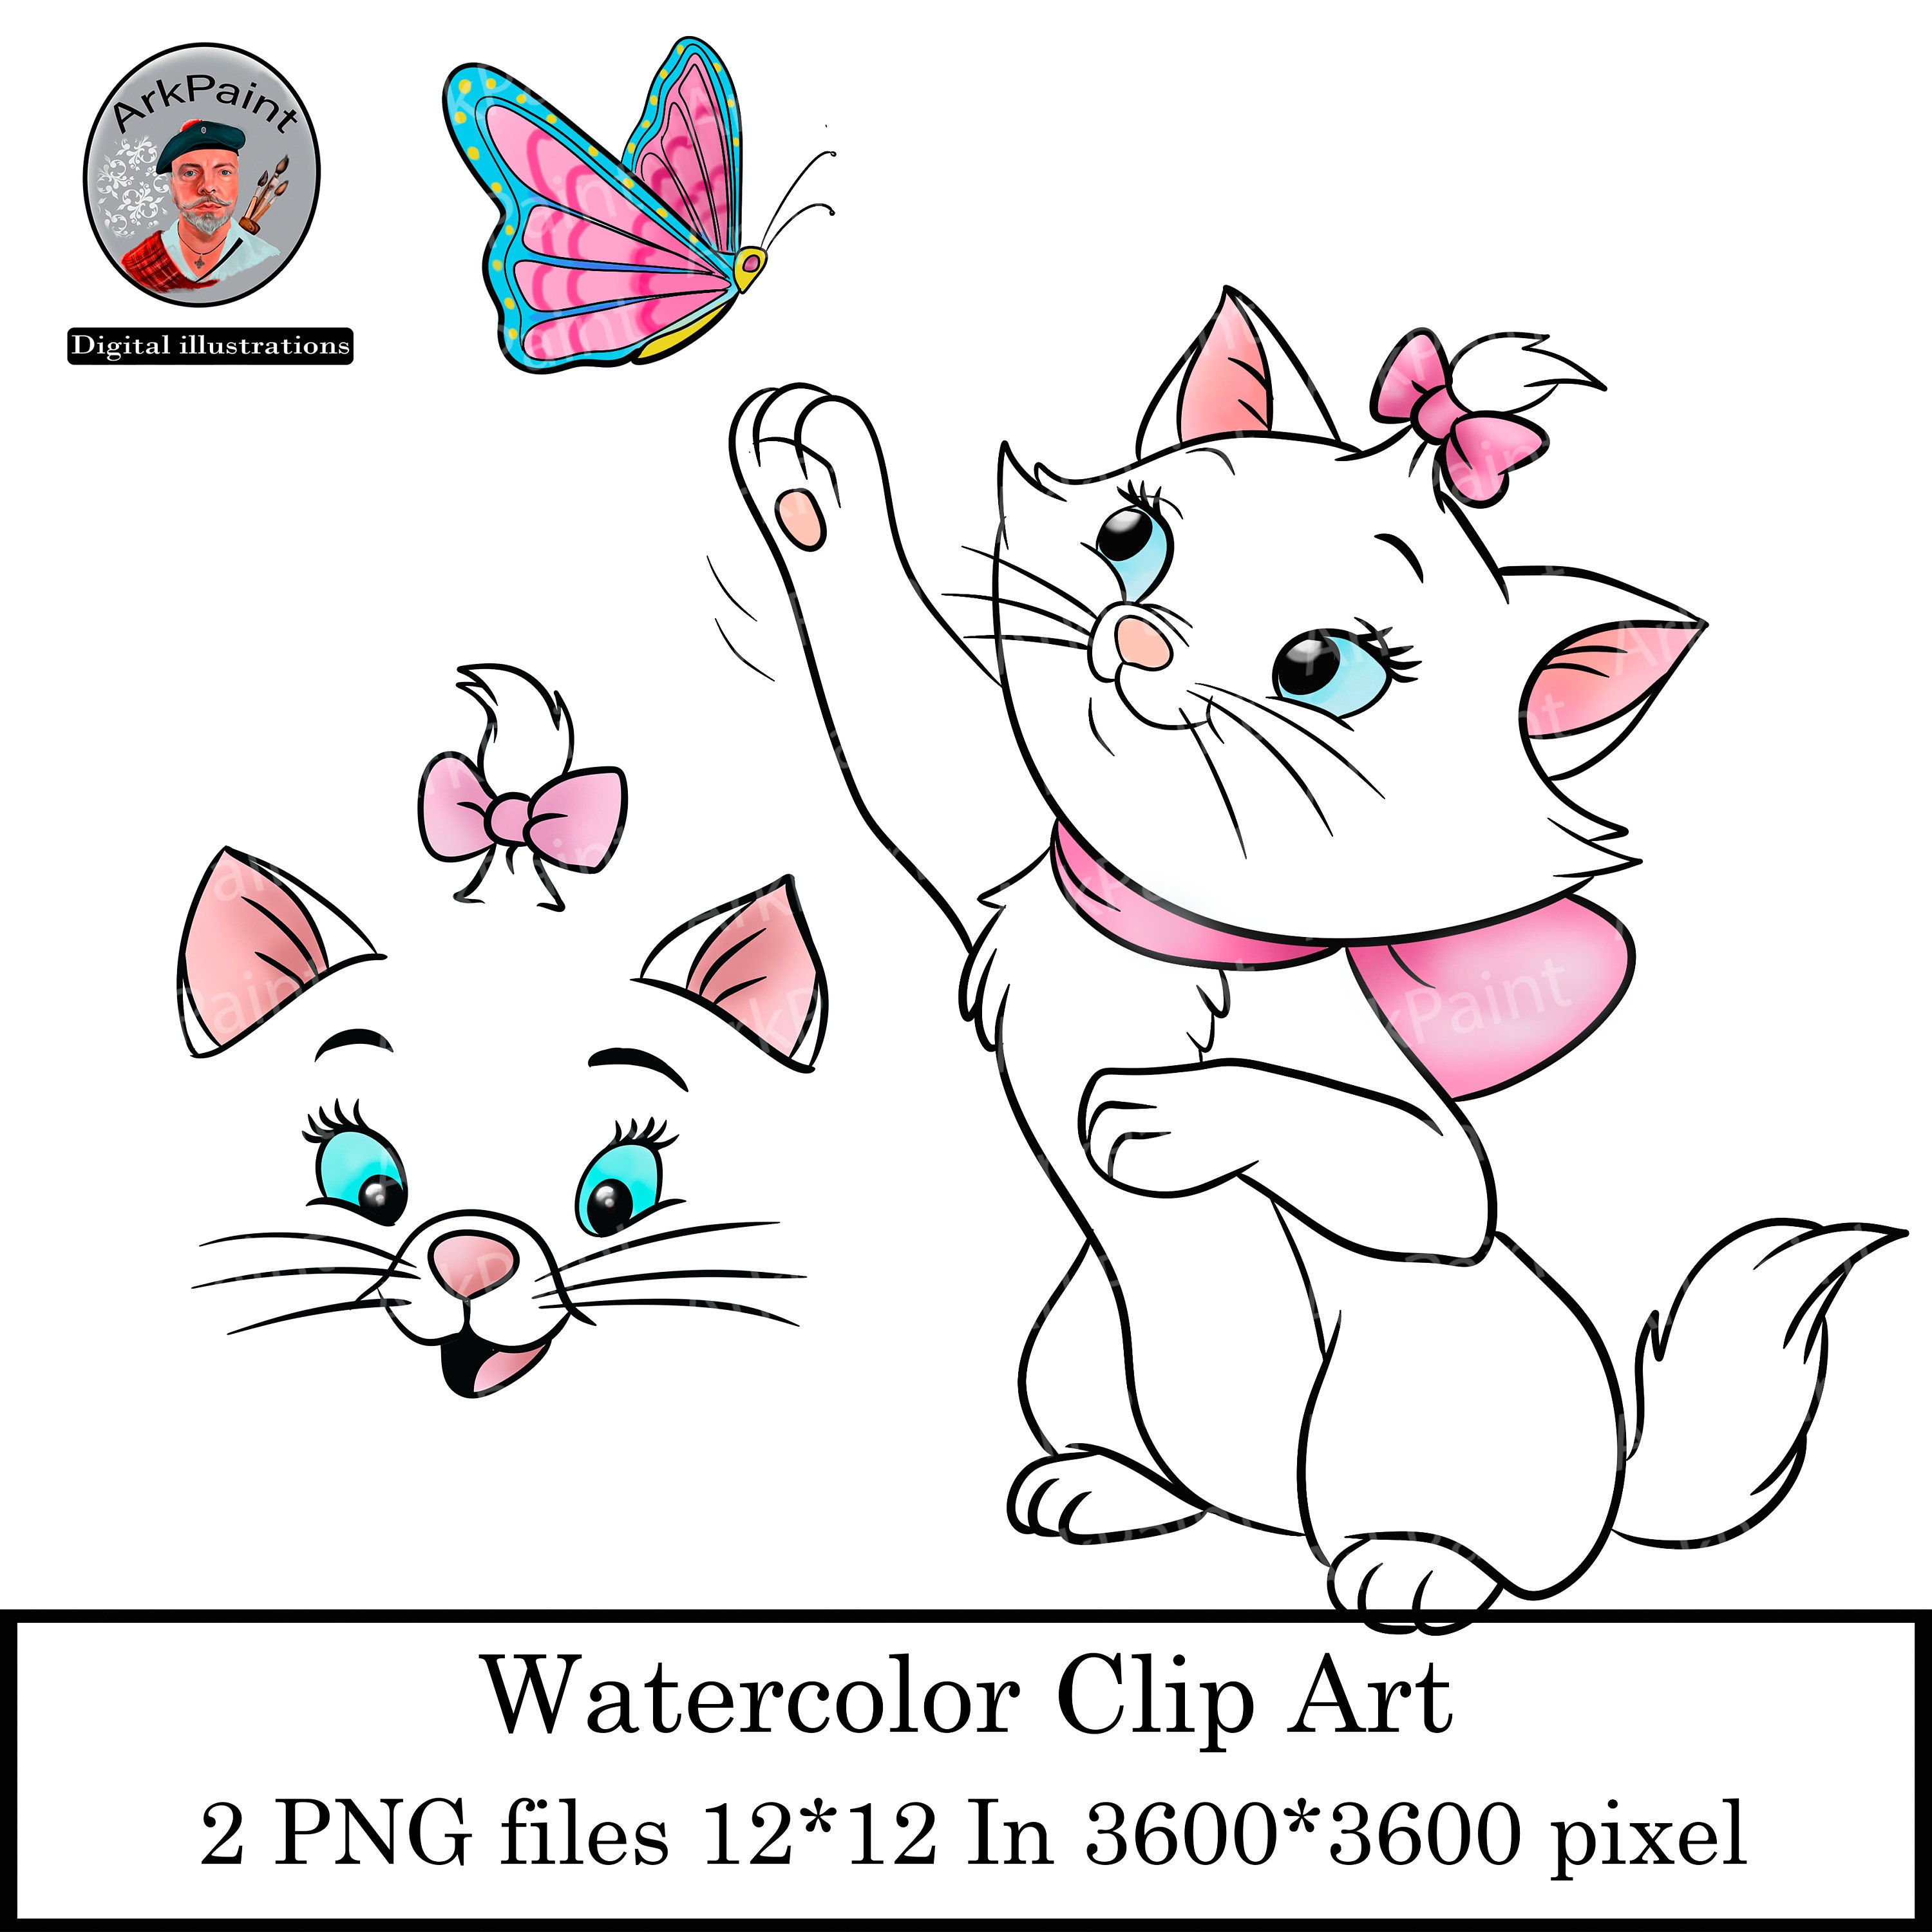 Cat Marie png images